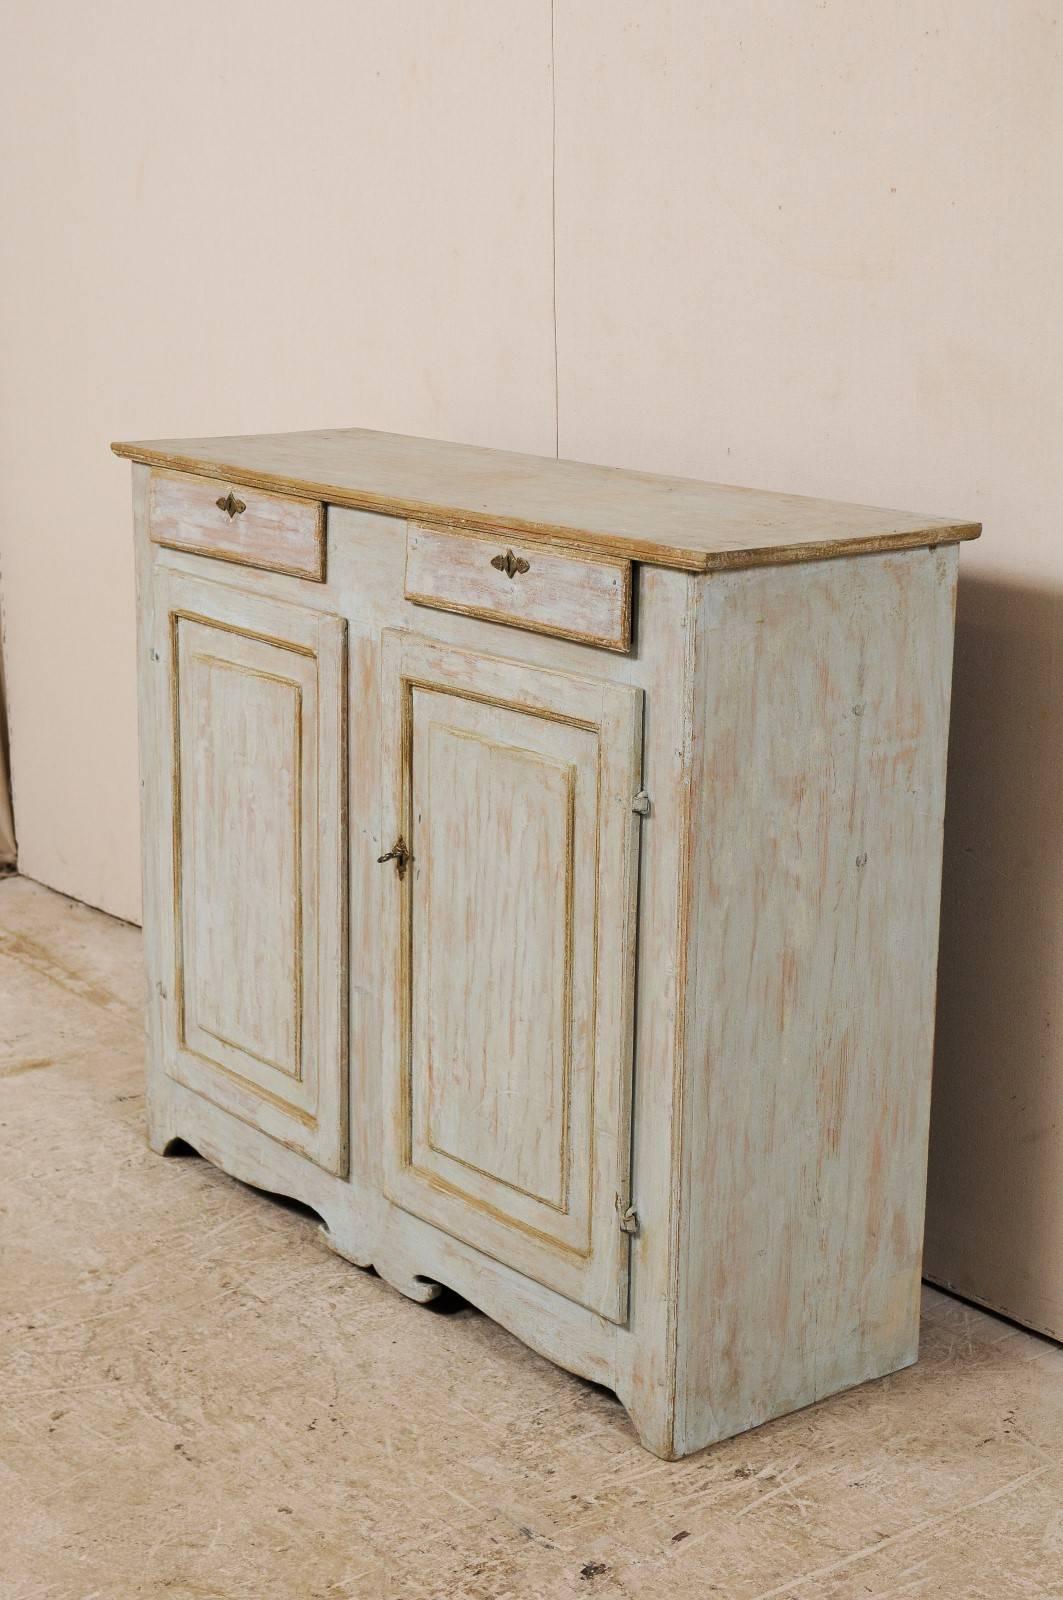 Metal Swedish Early 19th Century Karl Johan Period Painted Wood Cabinet in Pale Blue